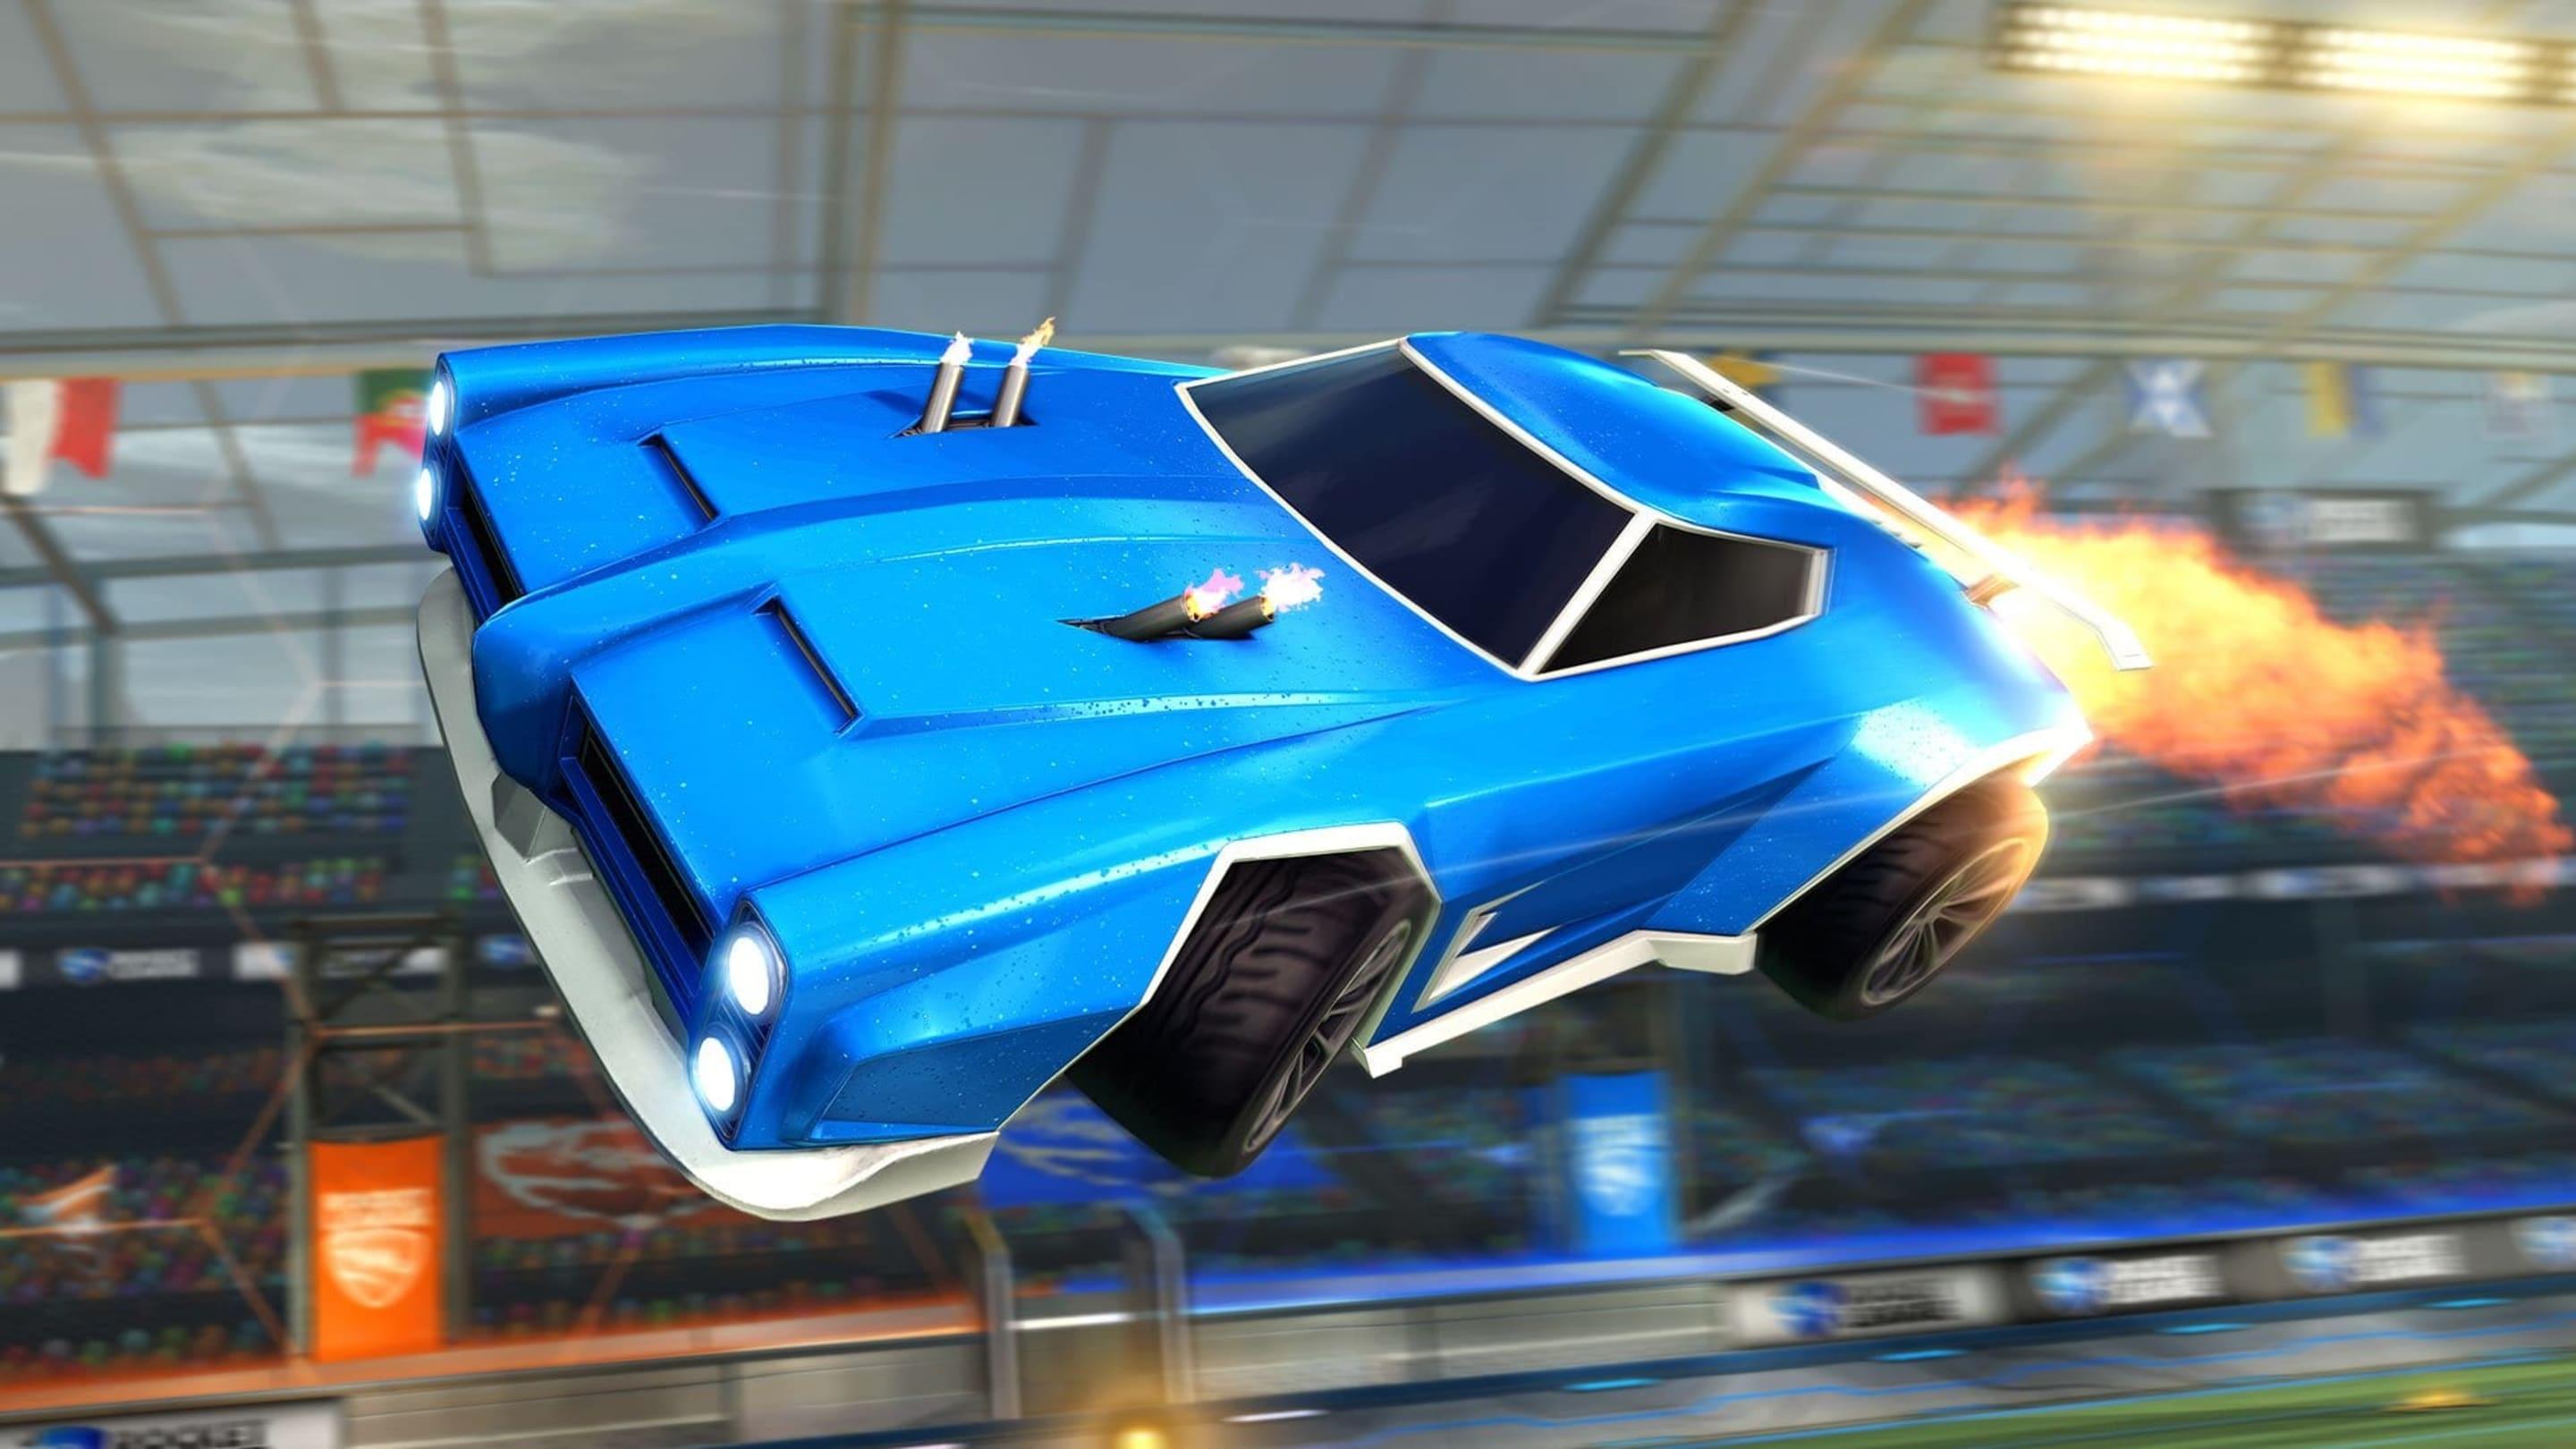 TWO NEW DOMINUS RELEASE TIMES!? 